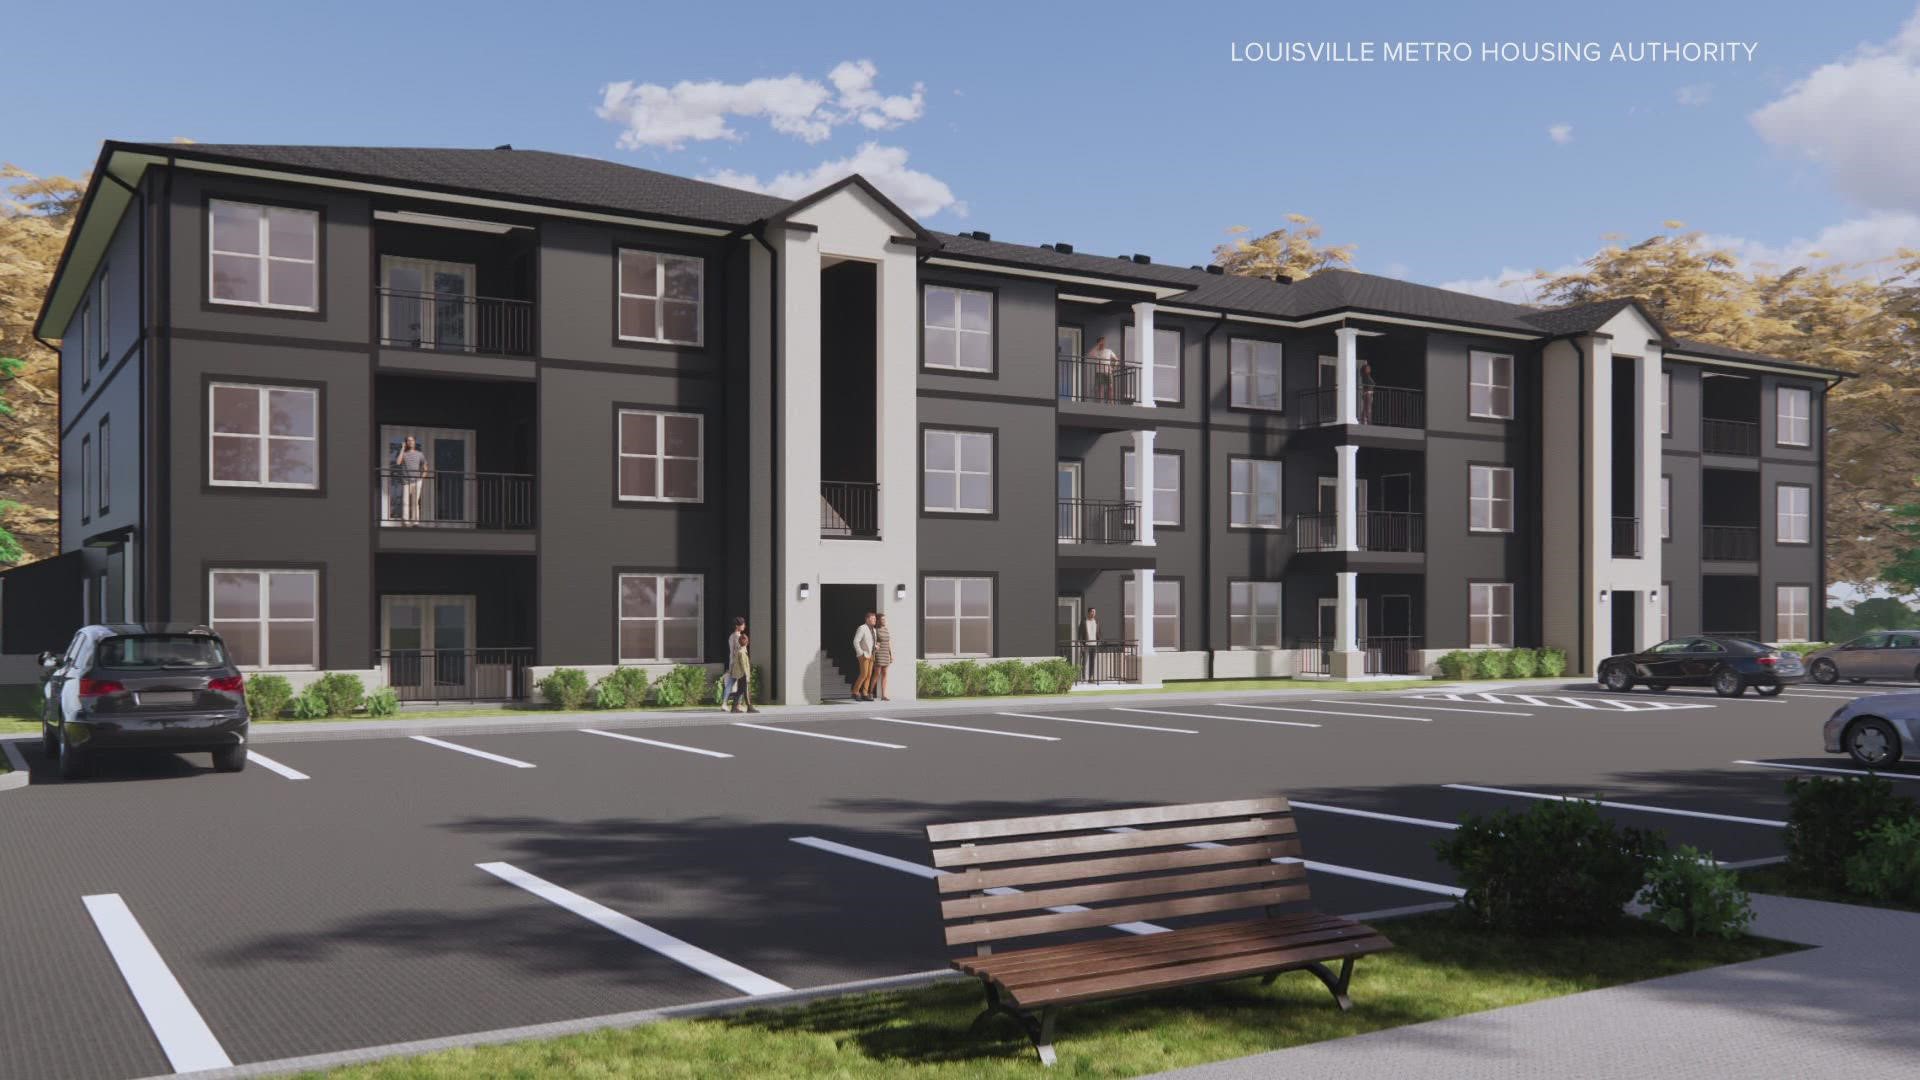 The Marian Group has broken ground on the complexes off Dixie Highway and Manslick Road.